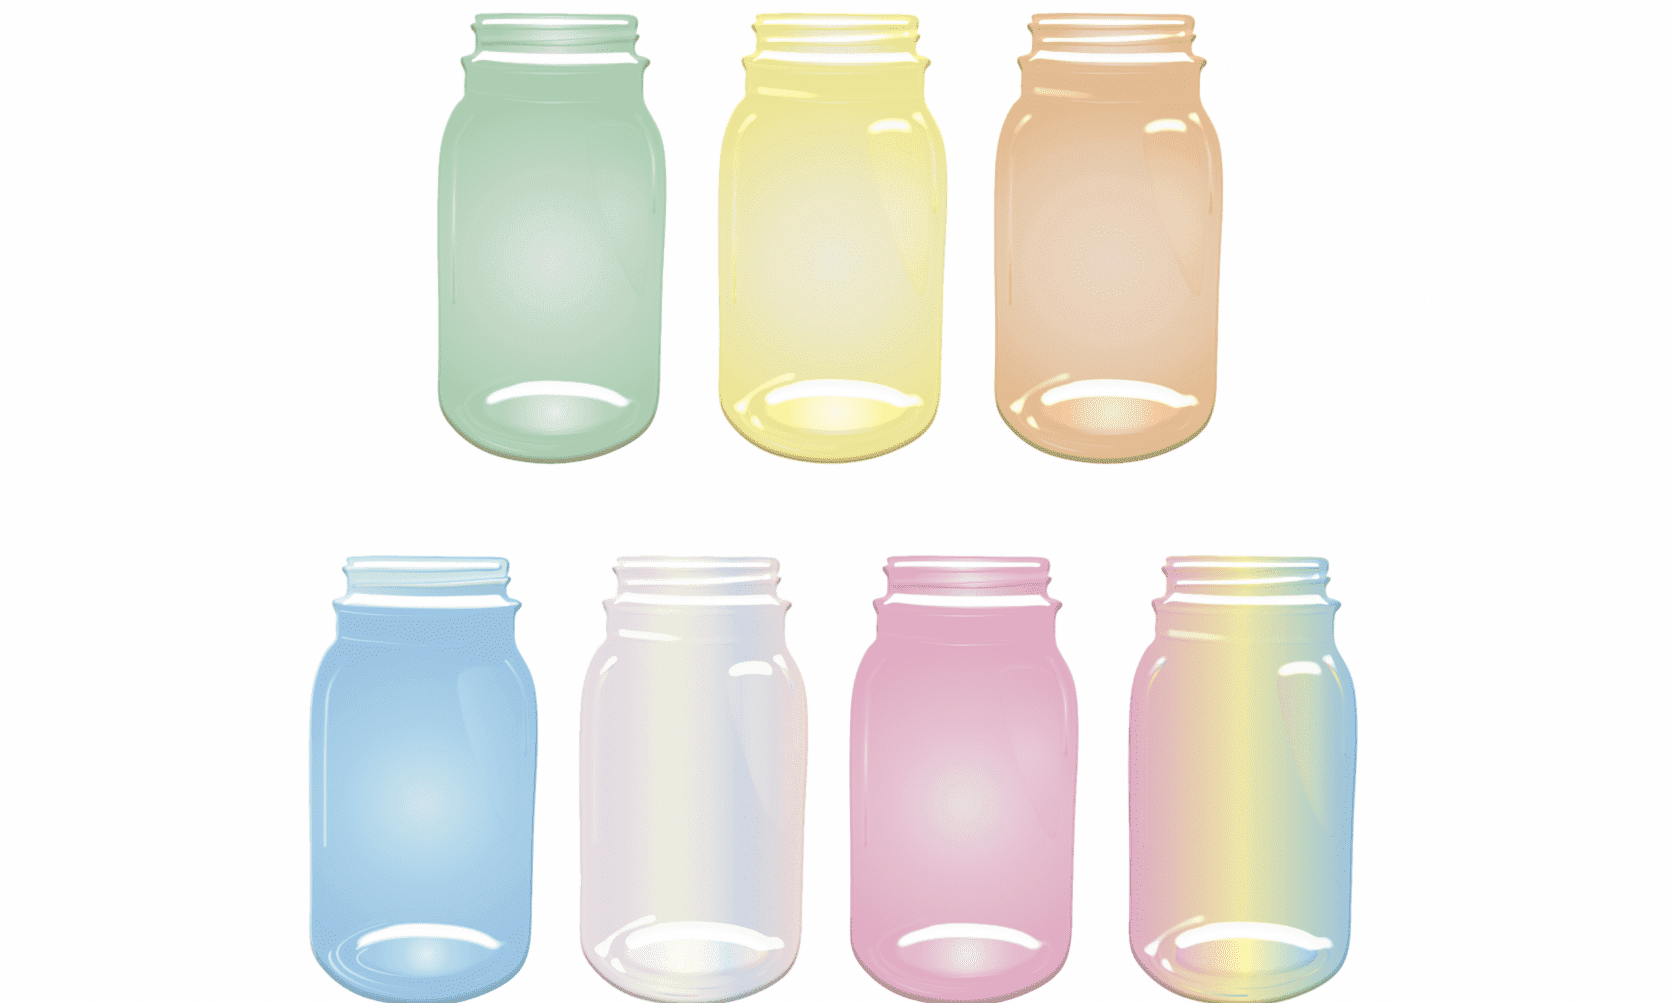 illustrations of mason jars in a variety of colors including green, yellow, orange, pink, and blue